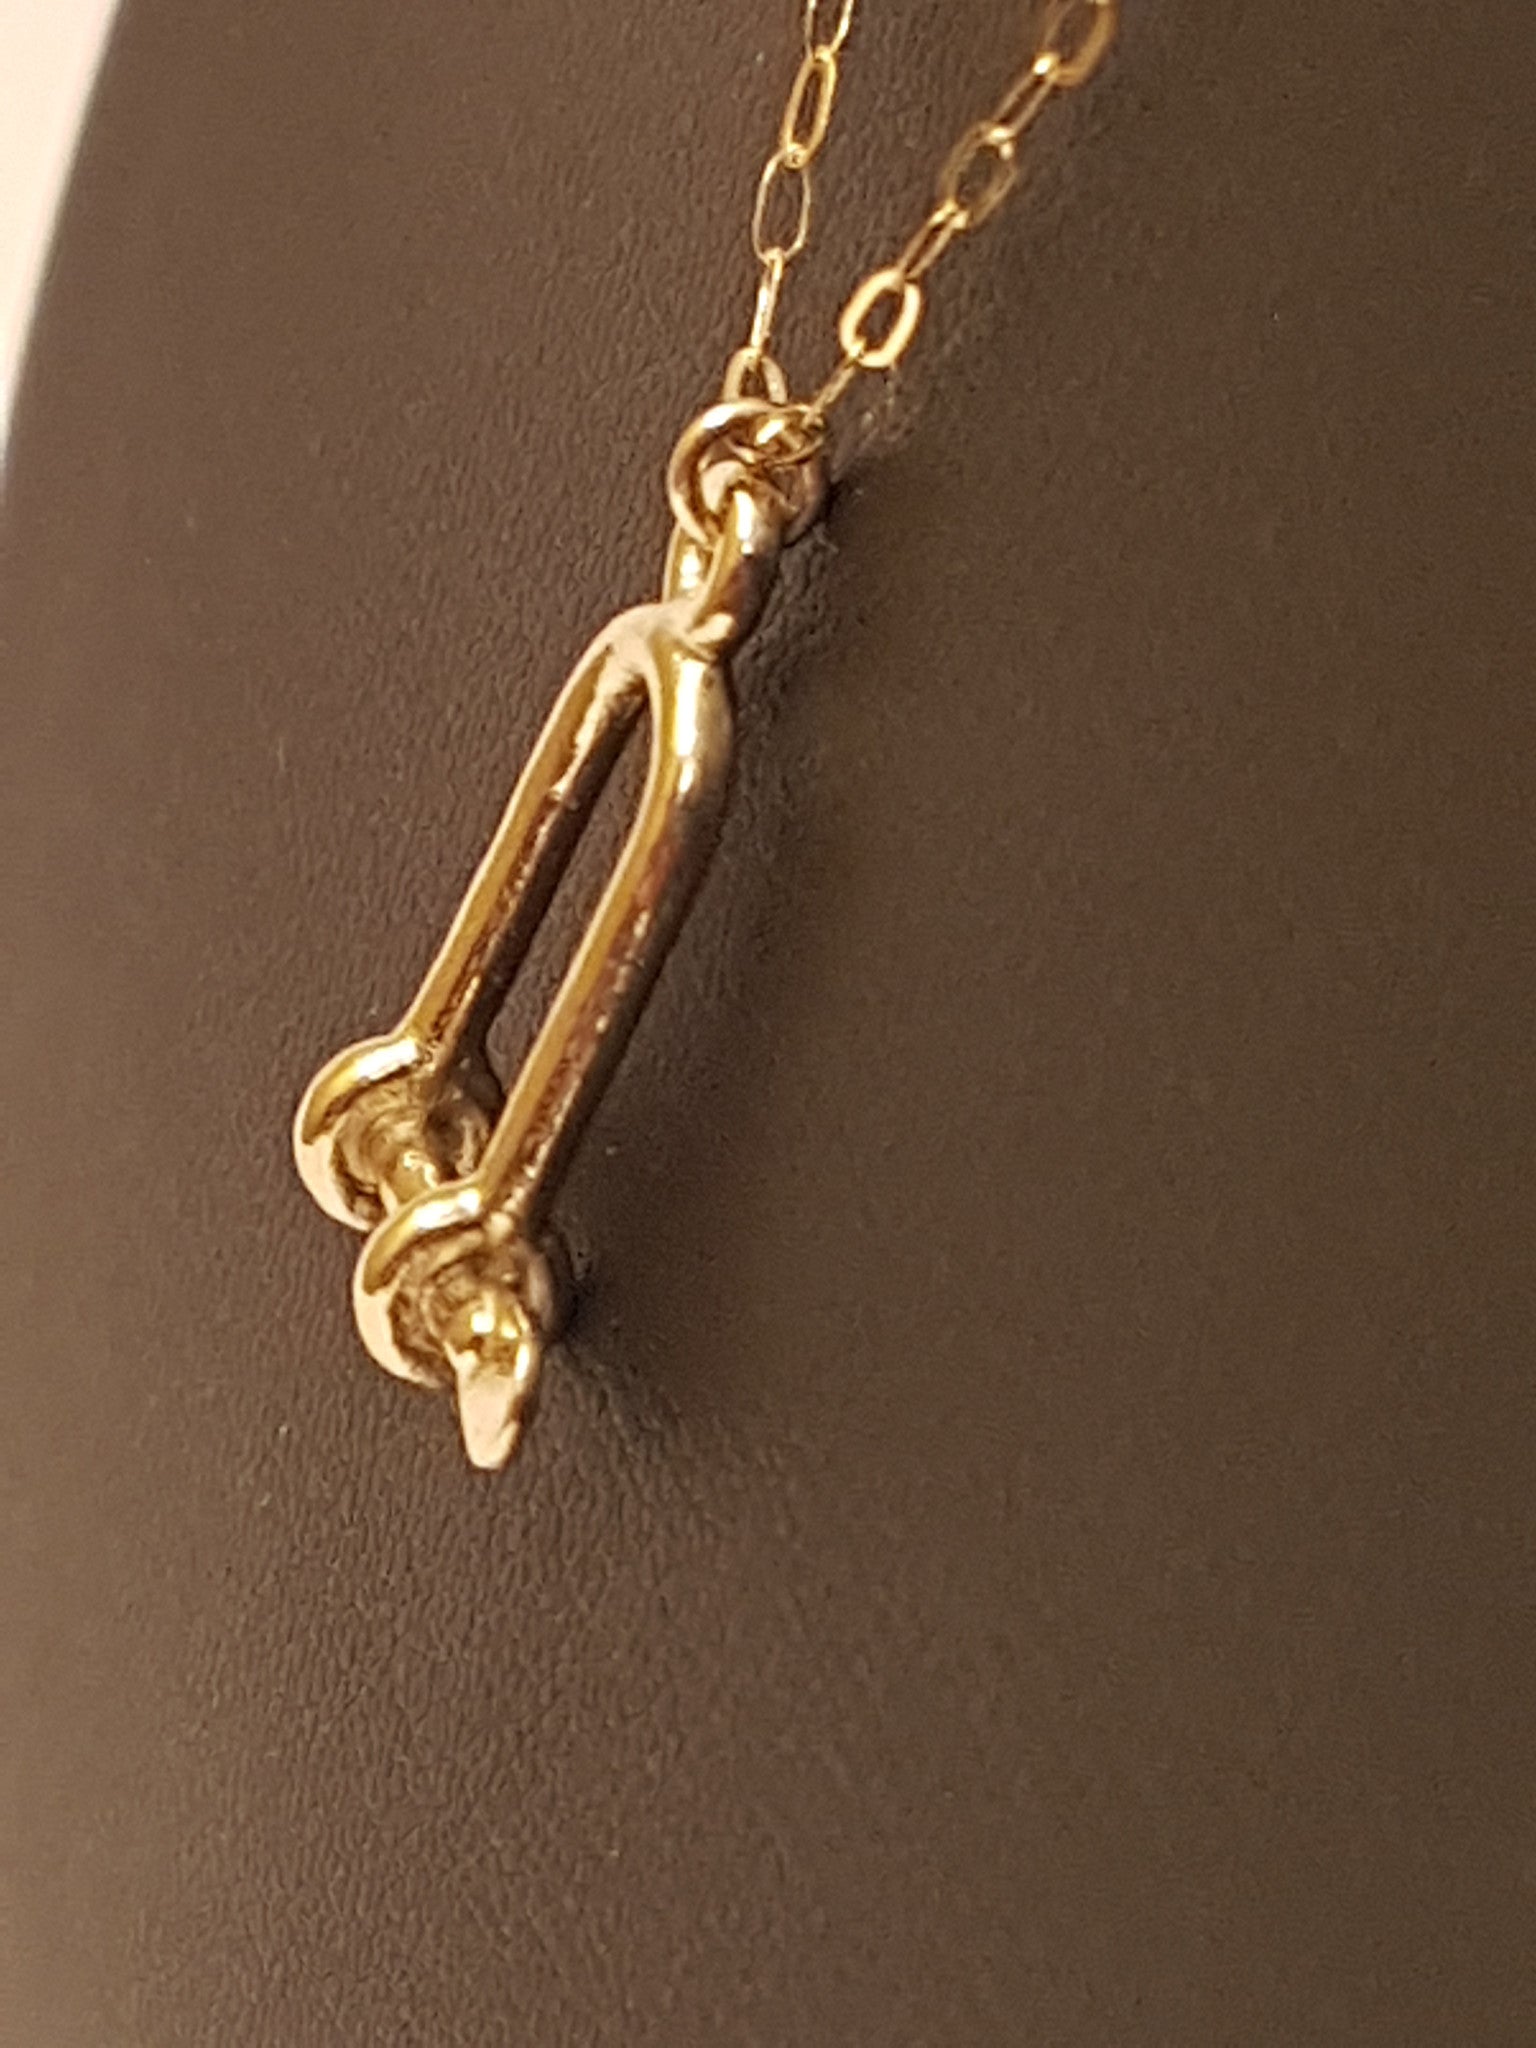 Gold Long Shackle Necklace